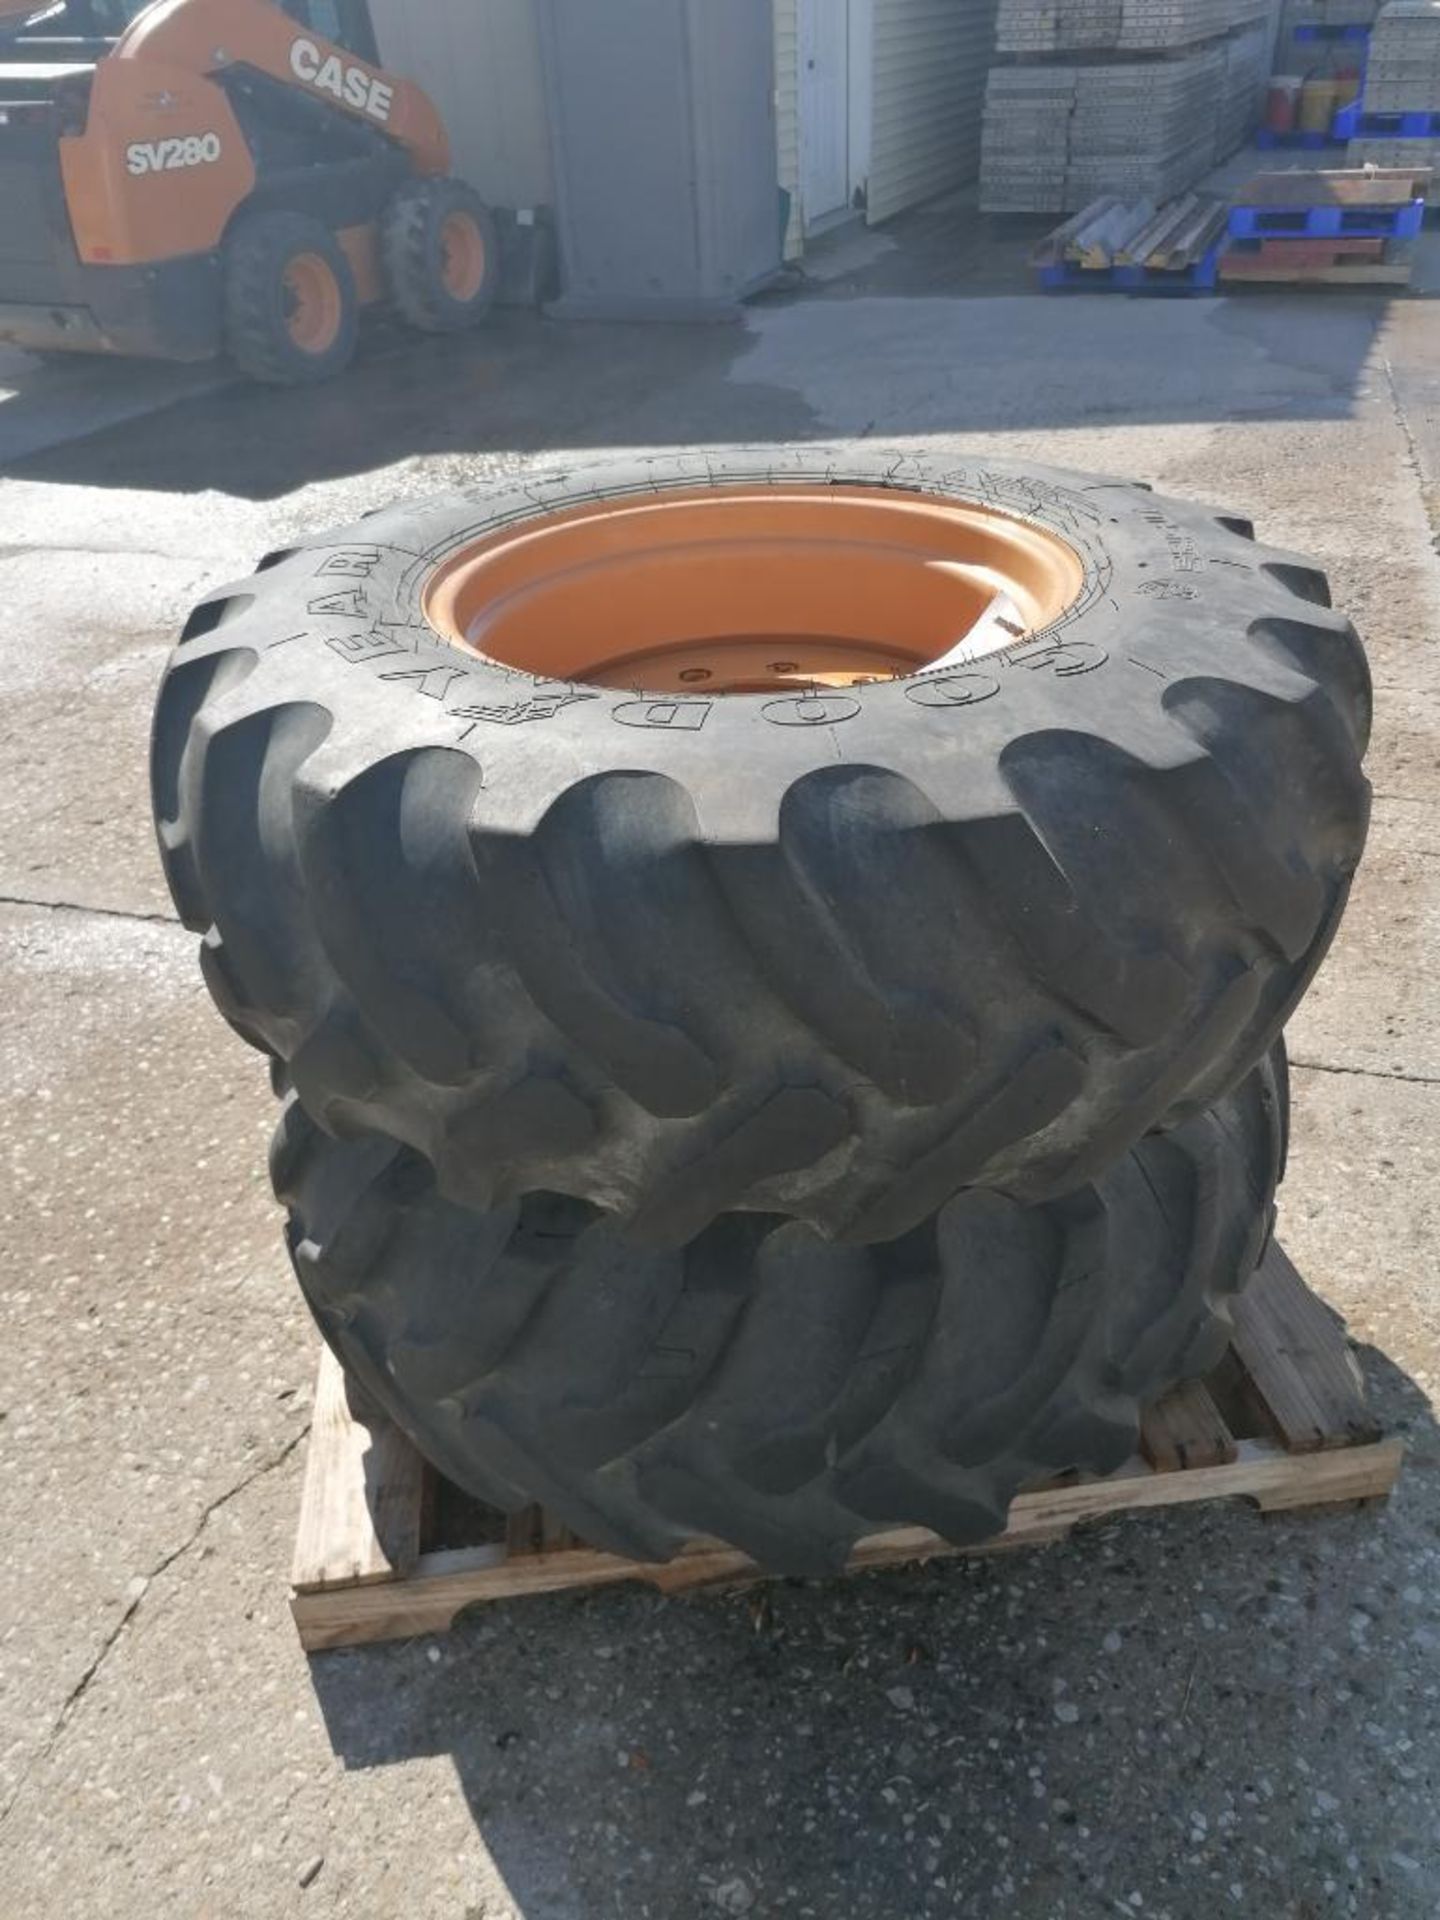 (2) GOODYEAR IT525, 17.5L-24 Tubeless Tires with 10 Bolt Pattern, 11" Center Rims. Located in Mt. Pl